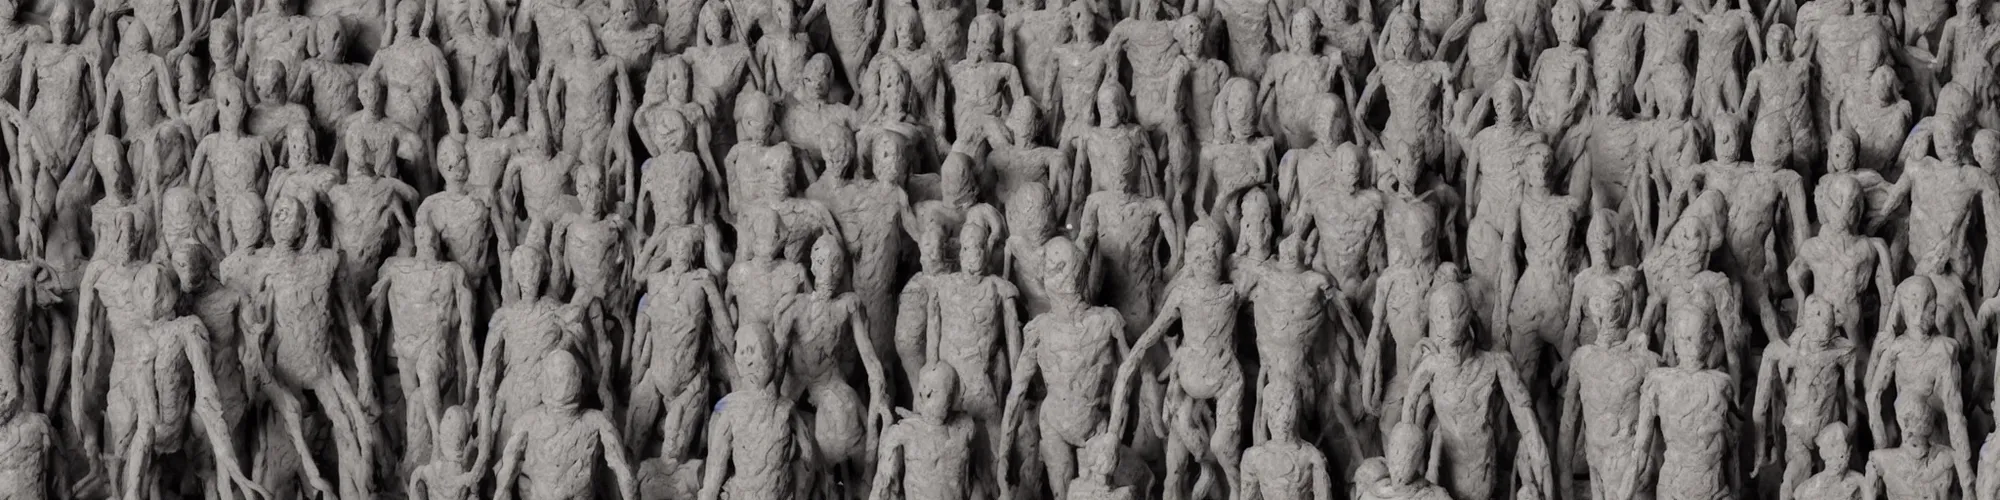 Prompt: hundreds of humans. A sea of humans. interconnected flesh. Melting clay golem humans. Dungeons&Dragons: Lemure. Lemure creature. Demonic scene. Many humans intertwined and woven together. Bodies and forms amesh. Extremely unsettling artwork. Clay sculpture by Alberto Giacometti.